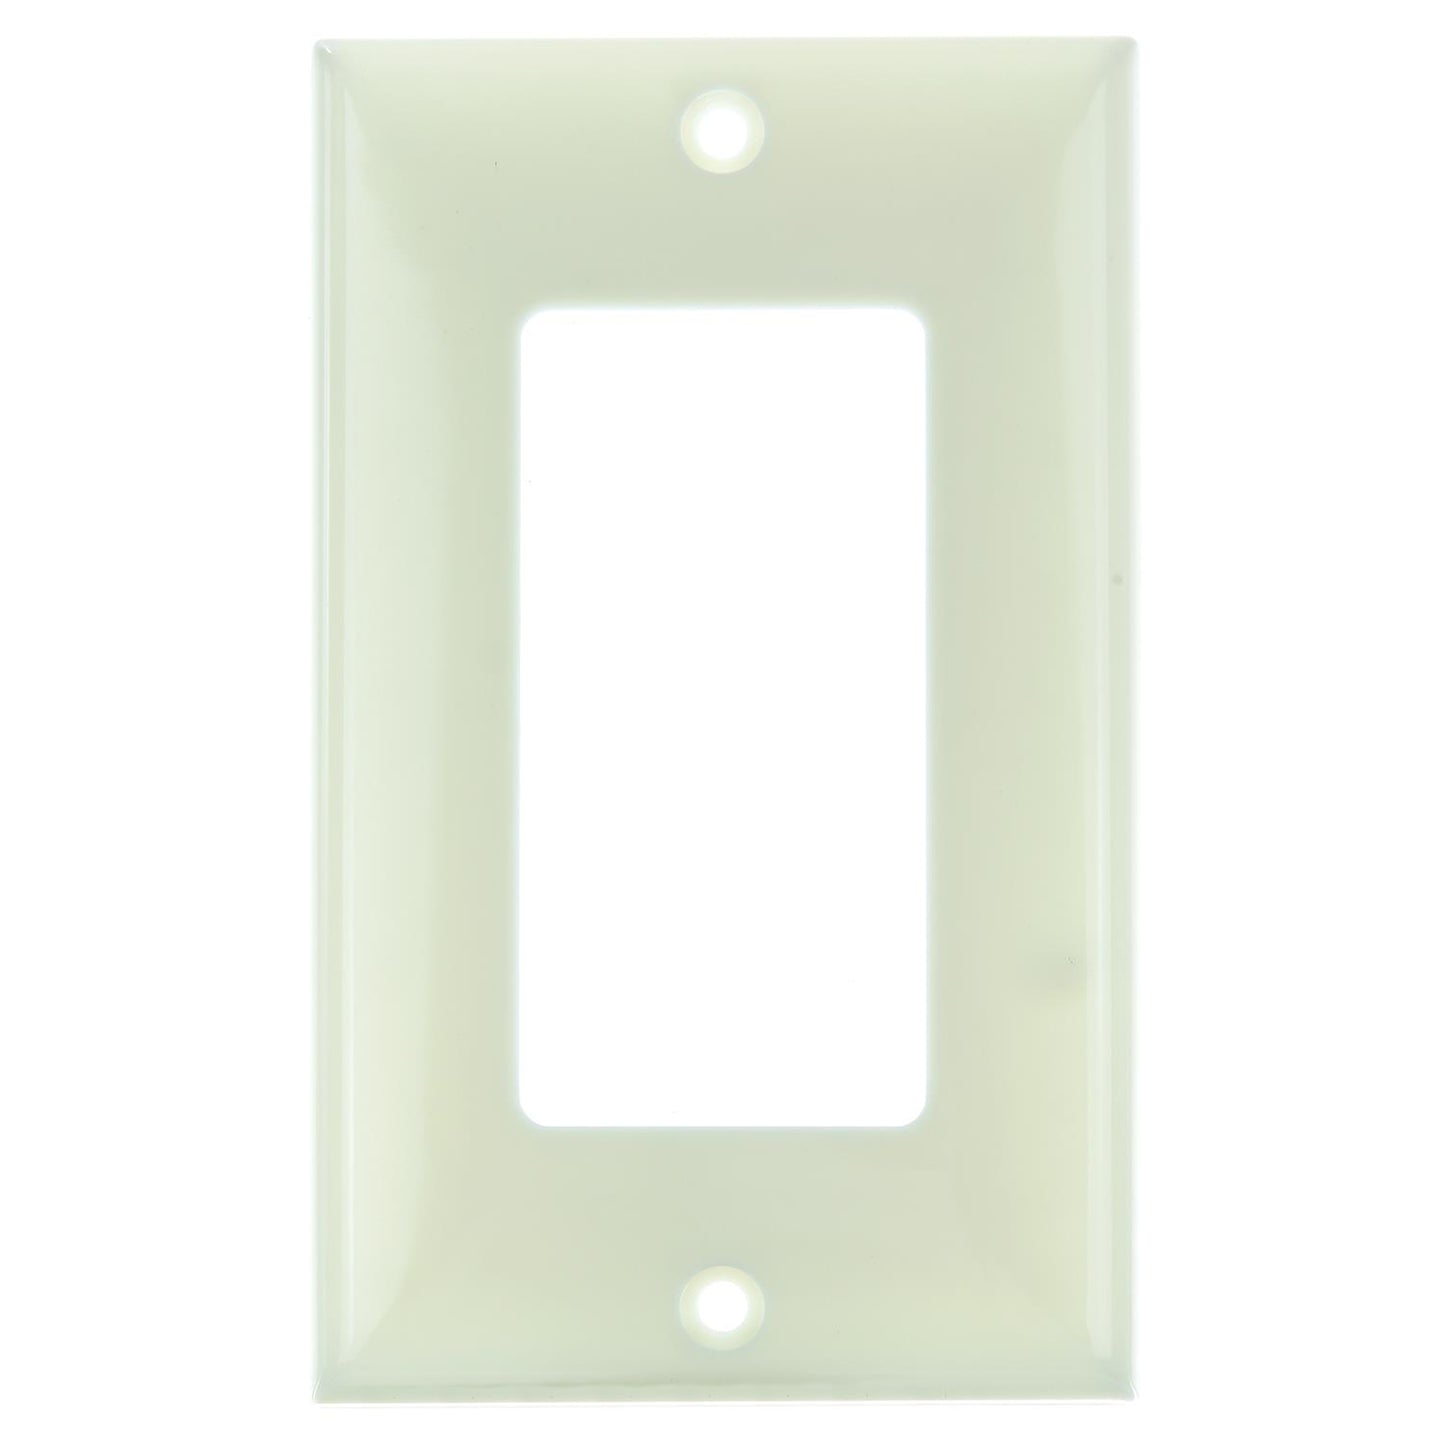 Sunlite E301/A 1 Gang Decorative Switch and Receptacle Plate, Almond